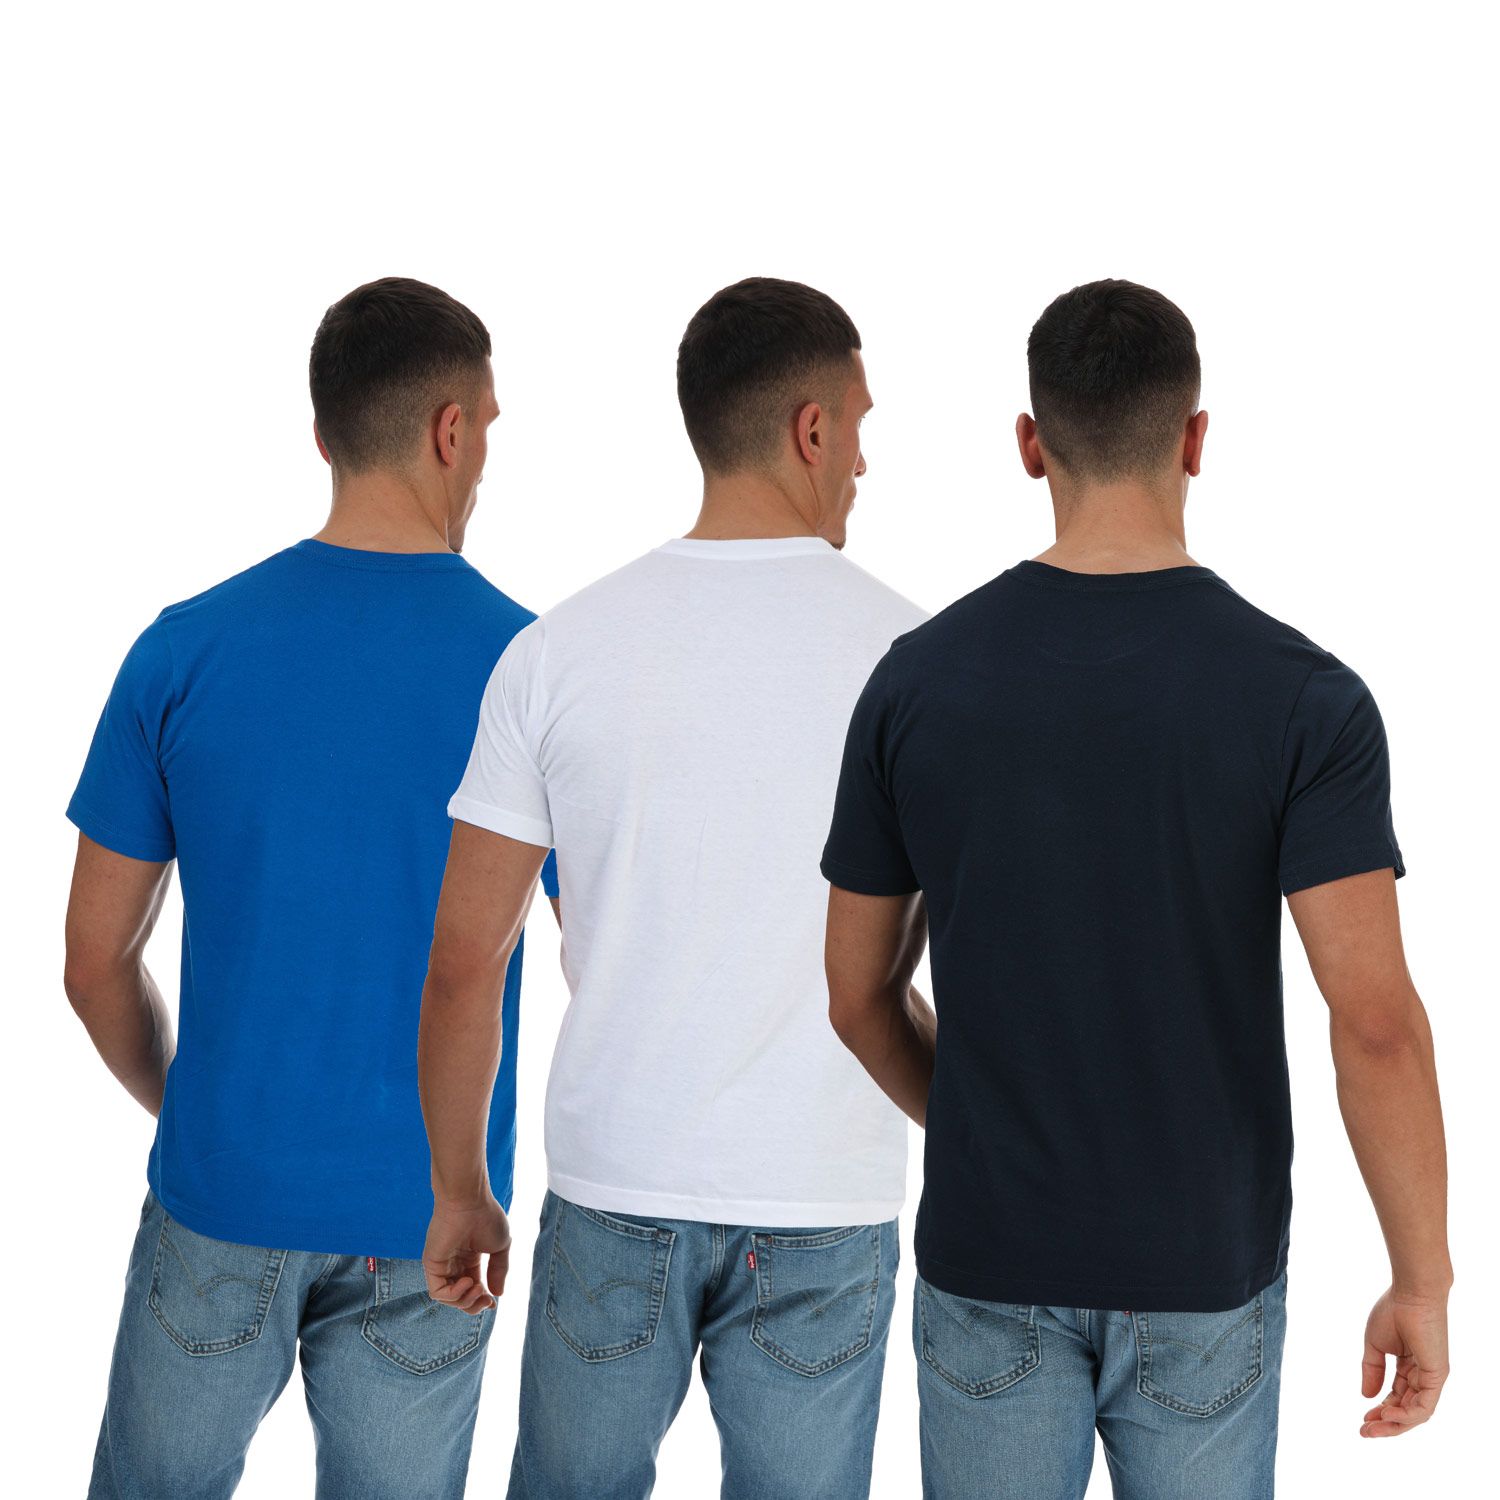 3 Giants Label Navy - White T-Shirts Lounge DKNY The Mens Pack Get